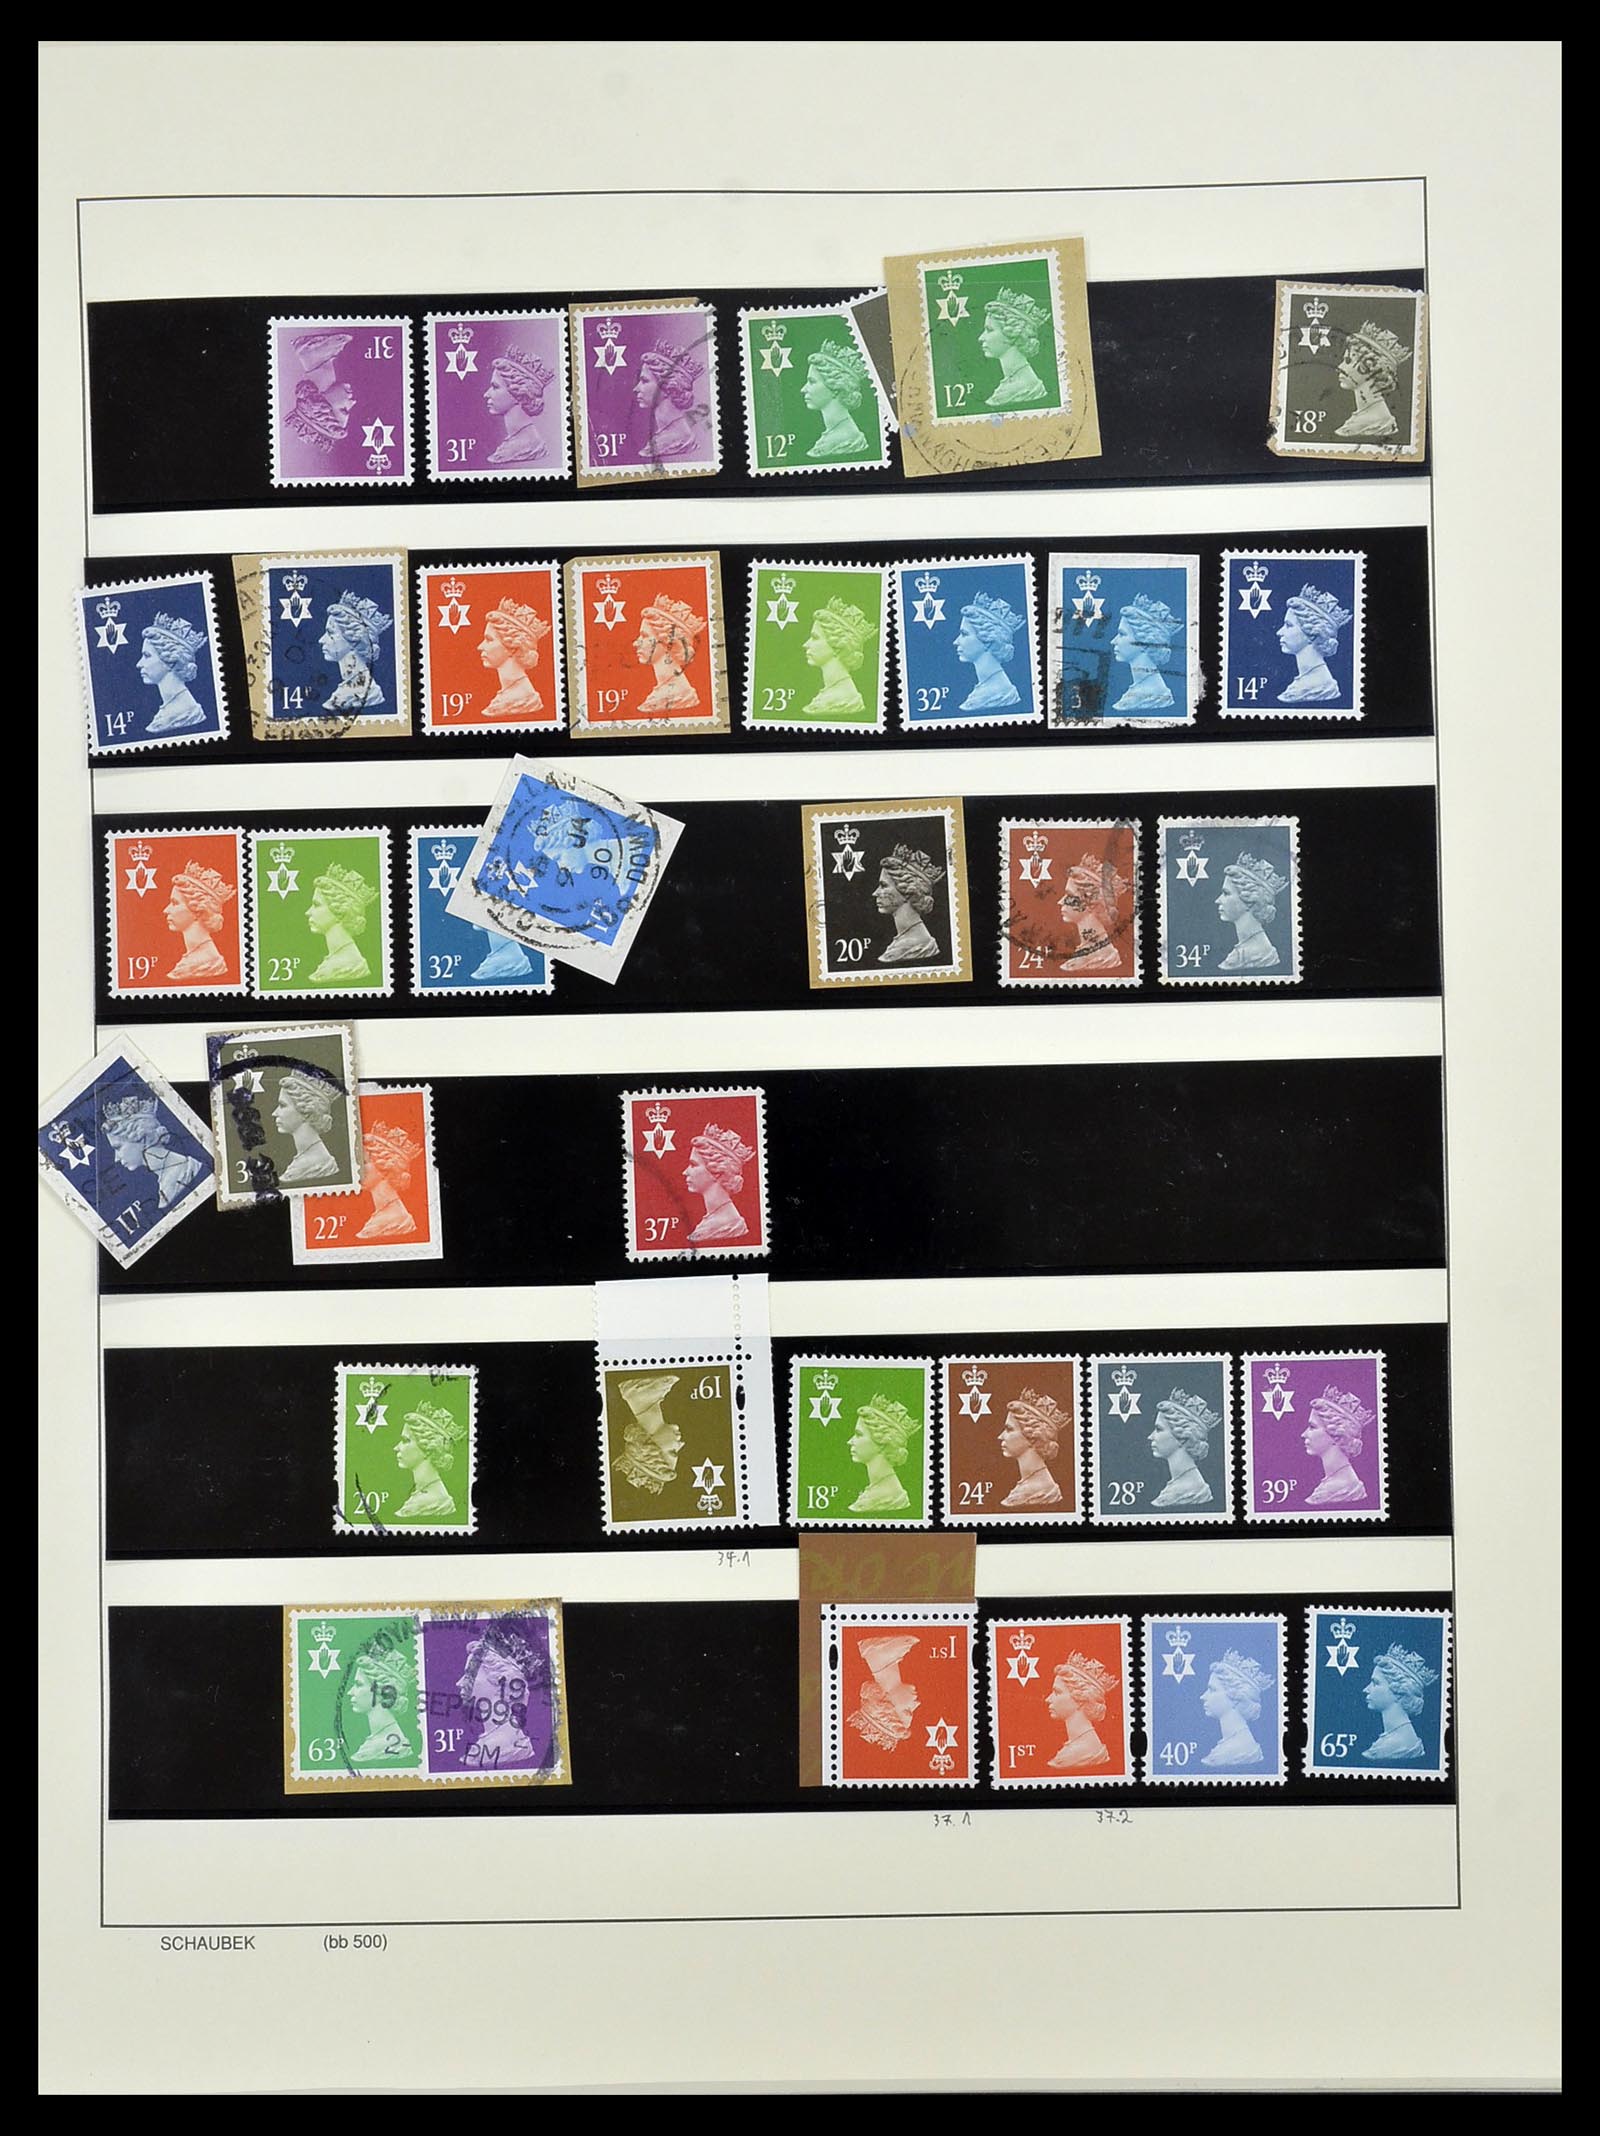 34221 010 - Stamp collection 34221 Great Britain Machins/castles 1971-2005.